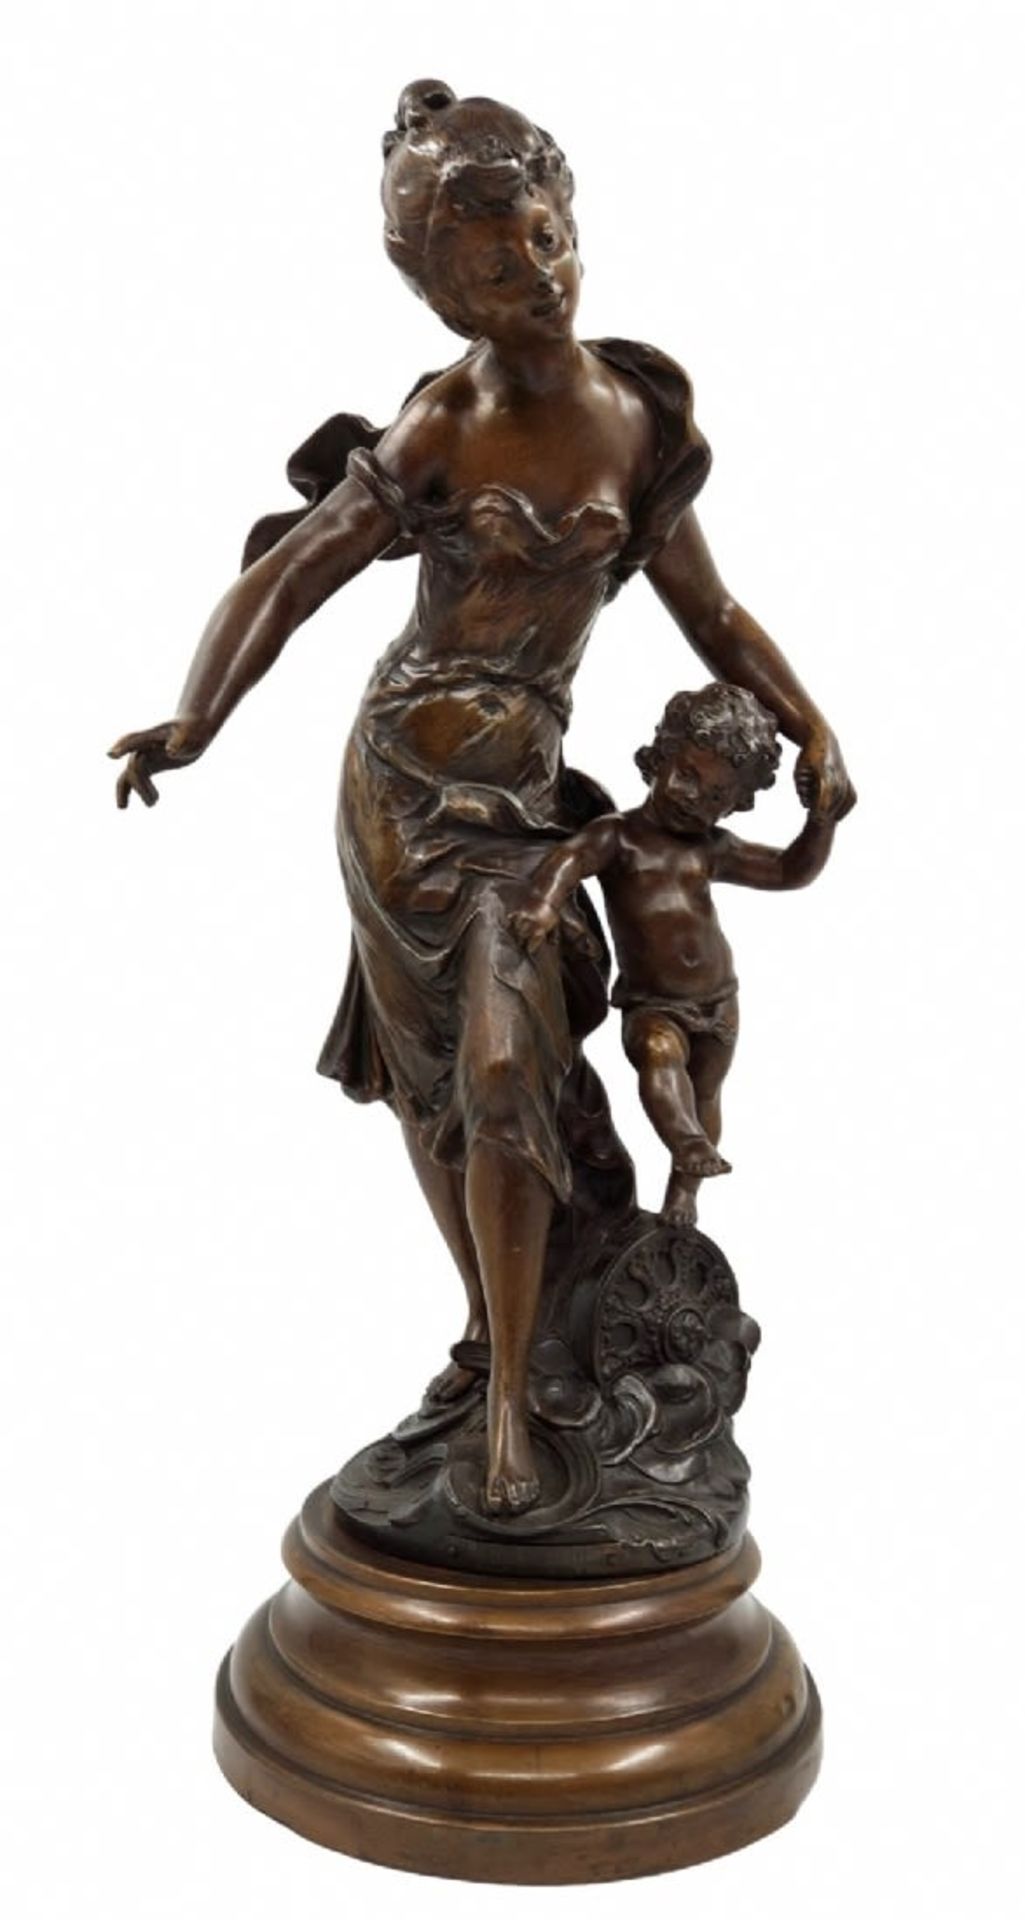 Auguste Moreau (French 1834-1917) - 'Fortuna and Cupid', an antique French sculpture from the last